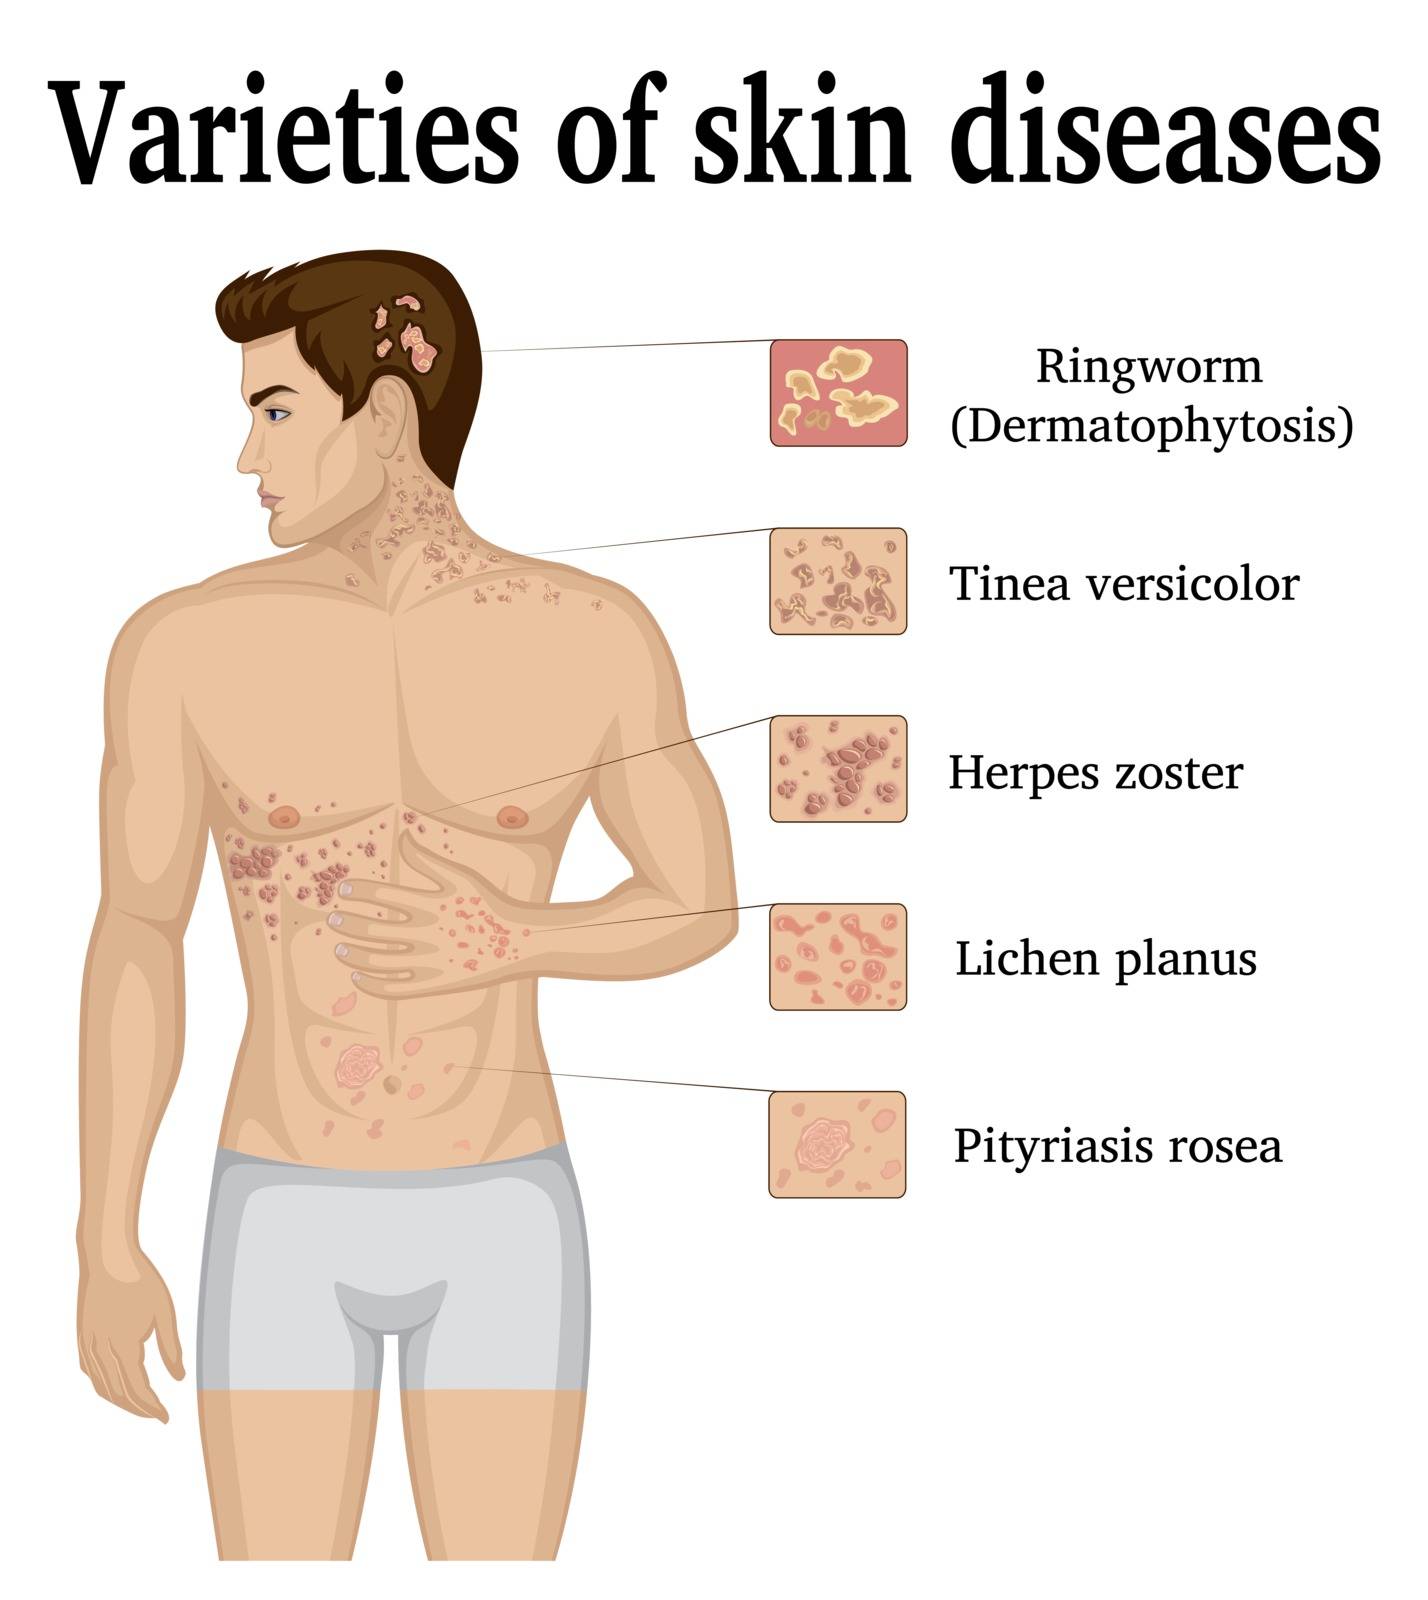 Varieties of skin diseases on the body of a young man